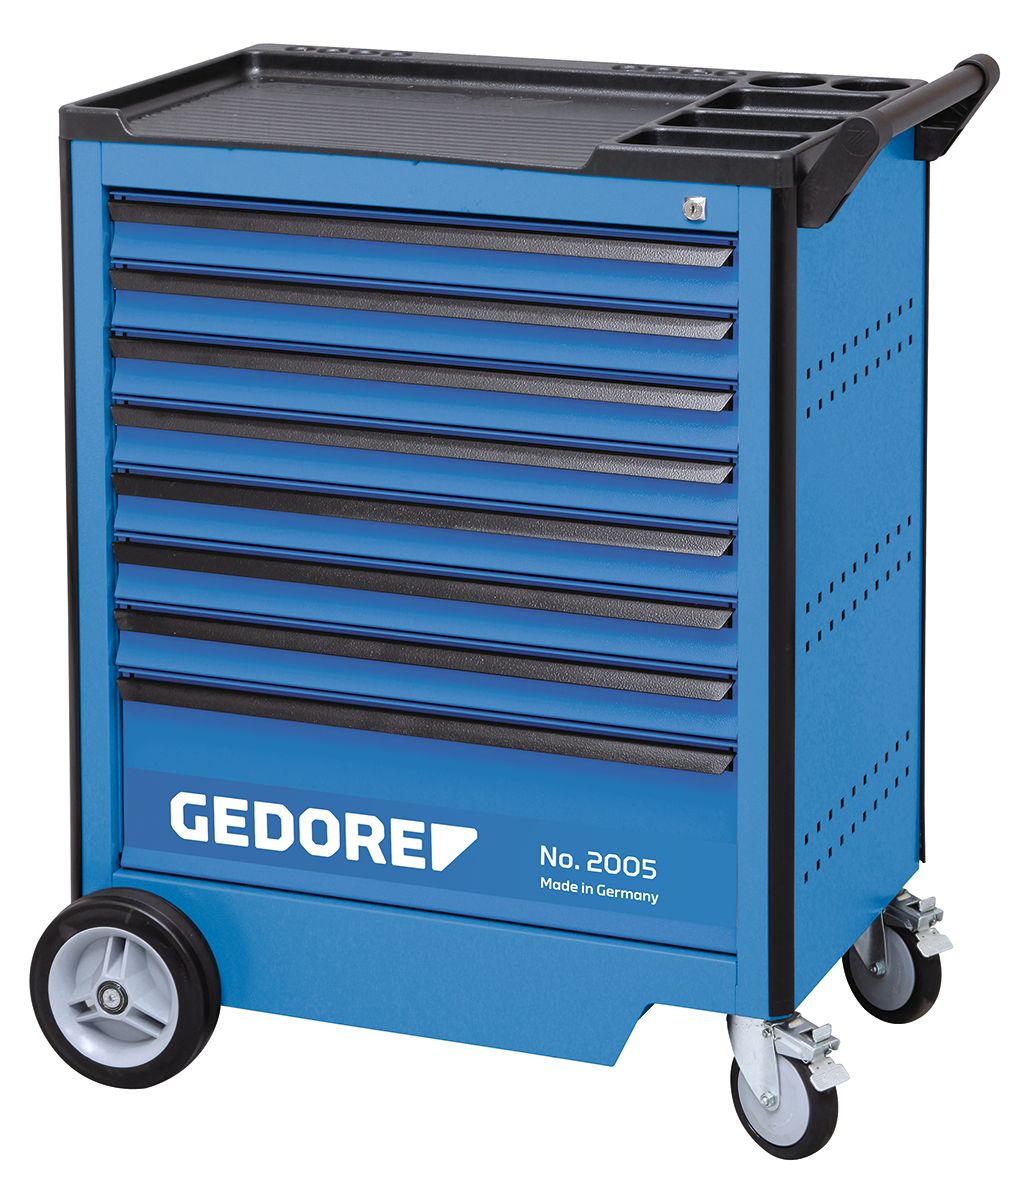 Gedore 2005 0701 Tool trolley with 8 drawers